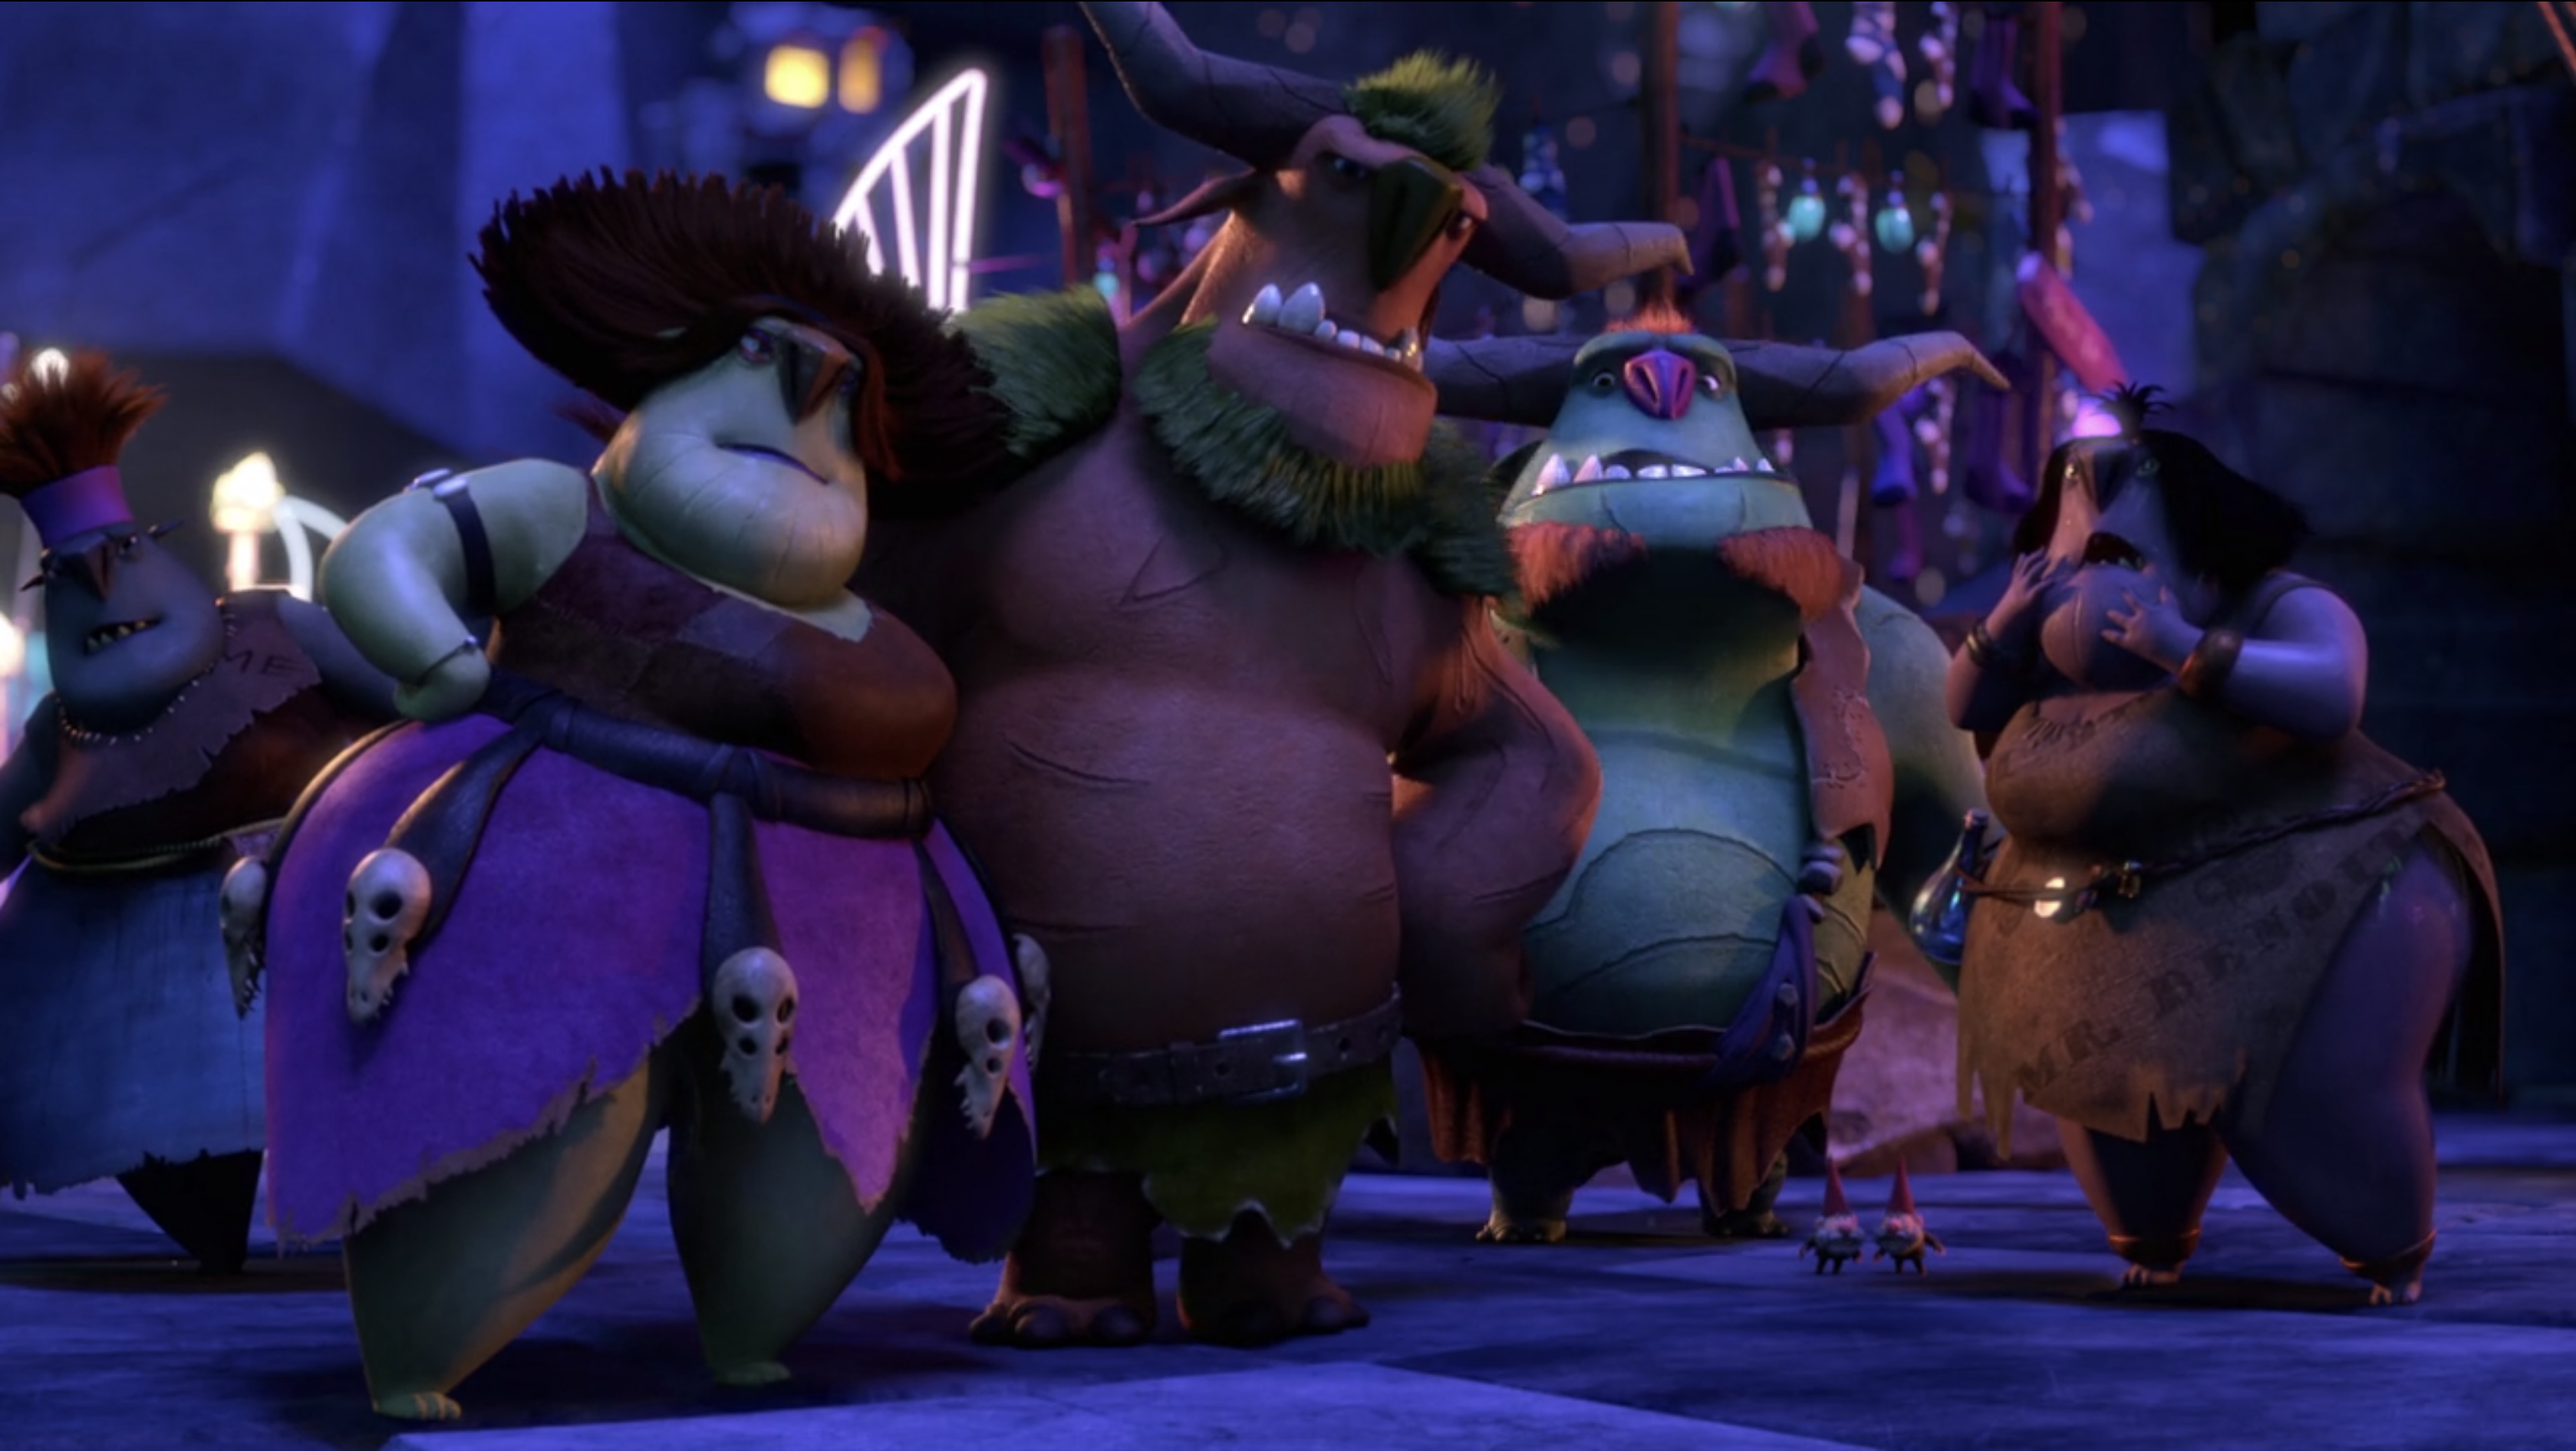 The Cast Of 'Trollhunters' Gives Advice On Dealing With Internet Trolls